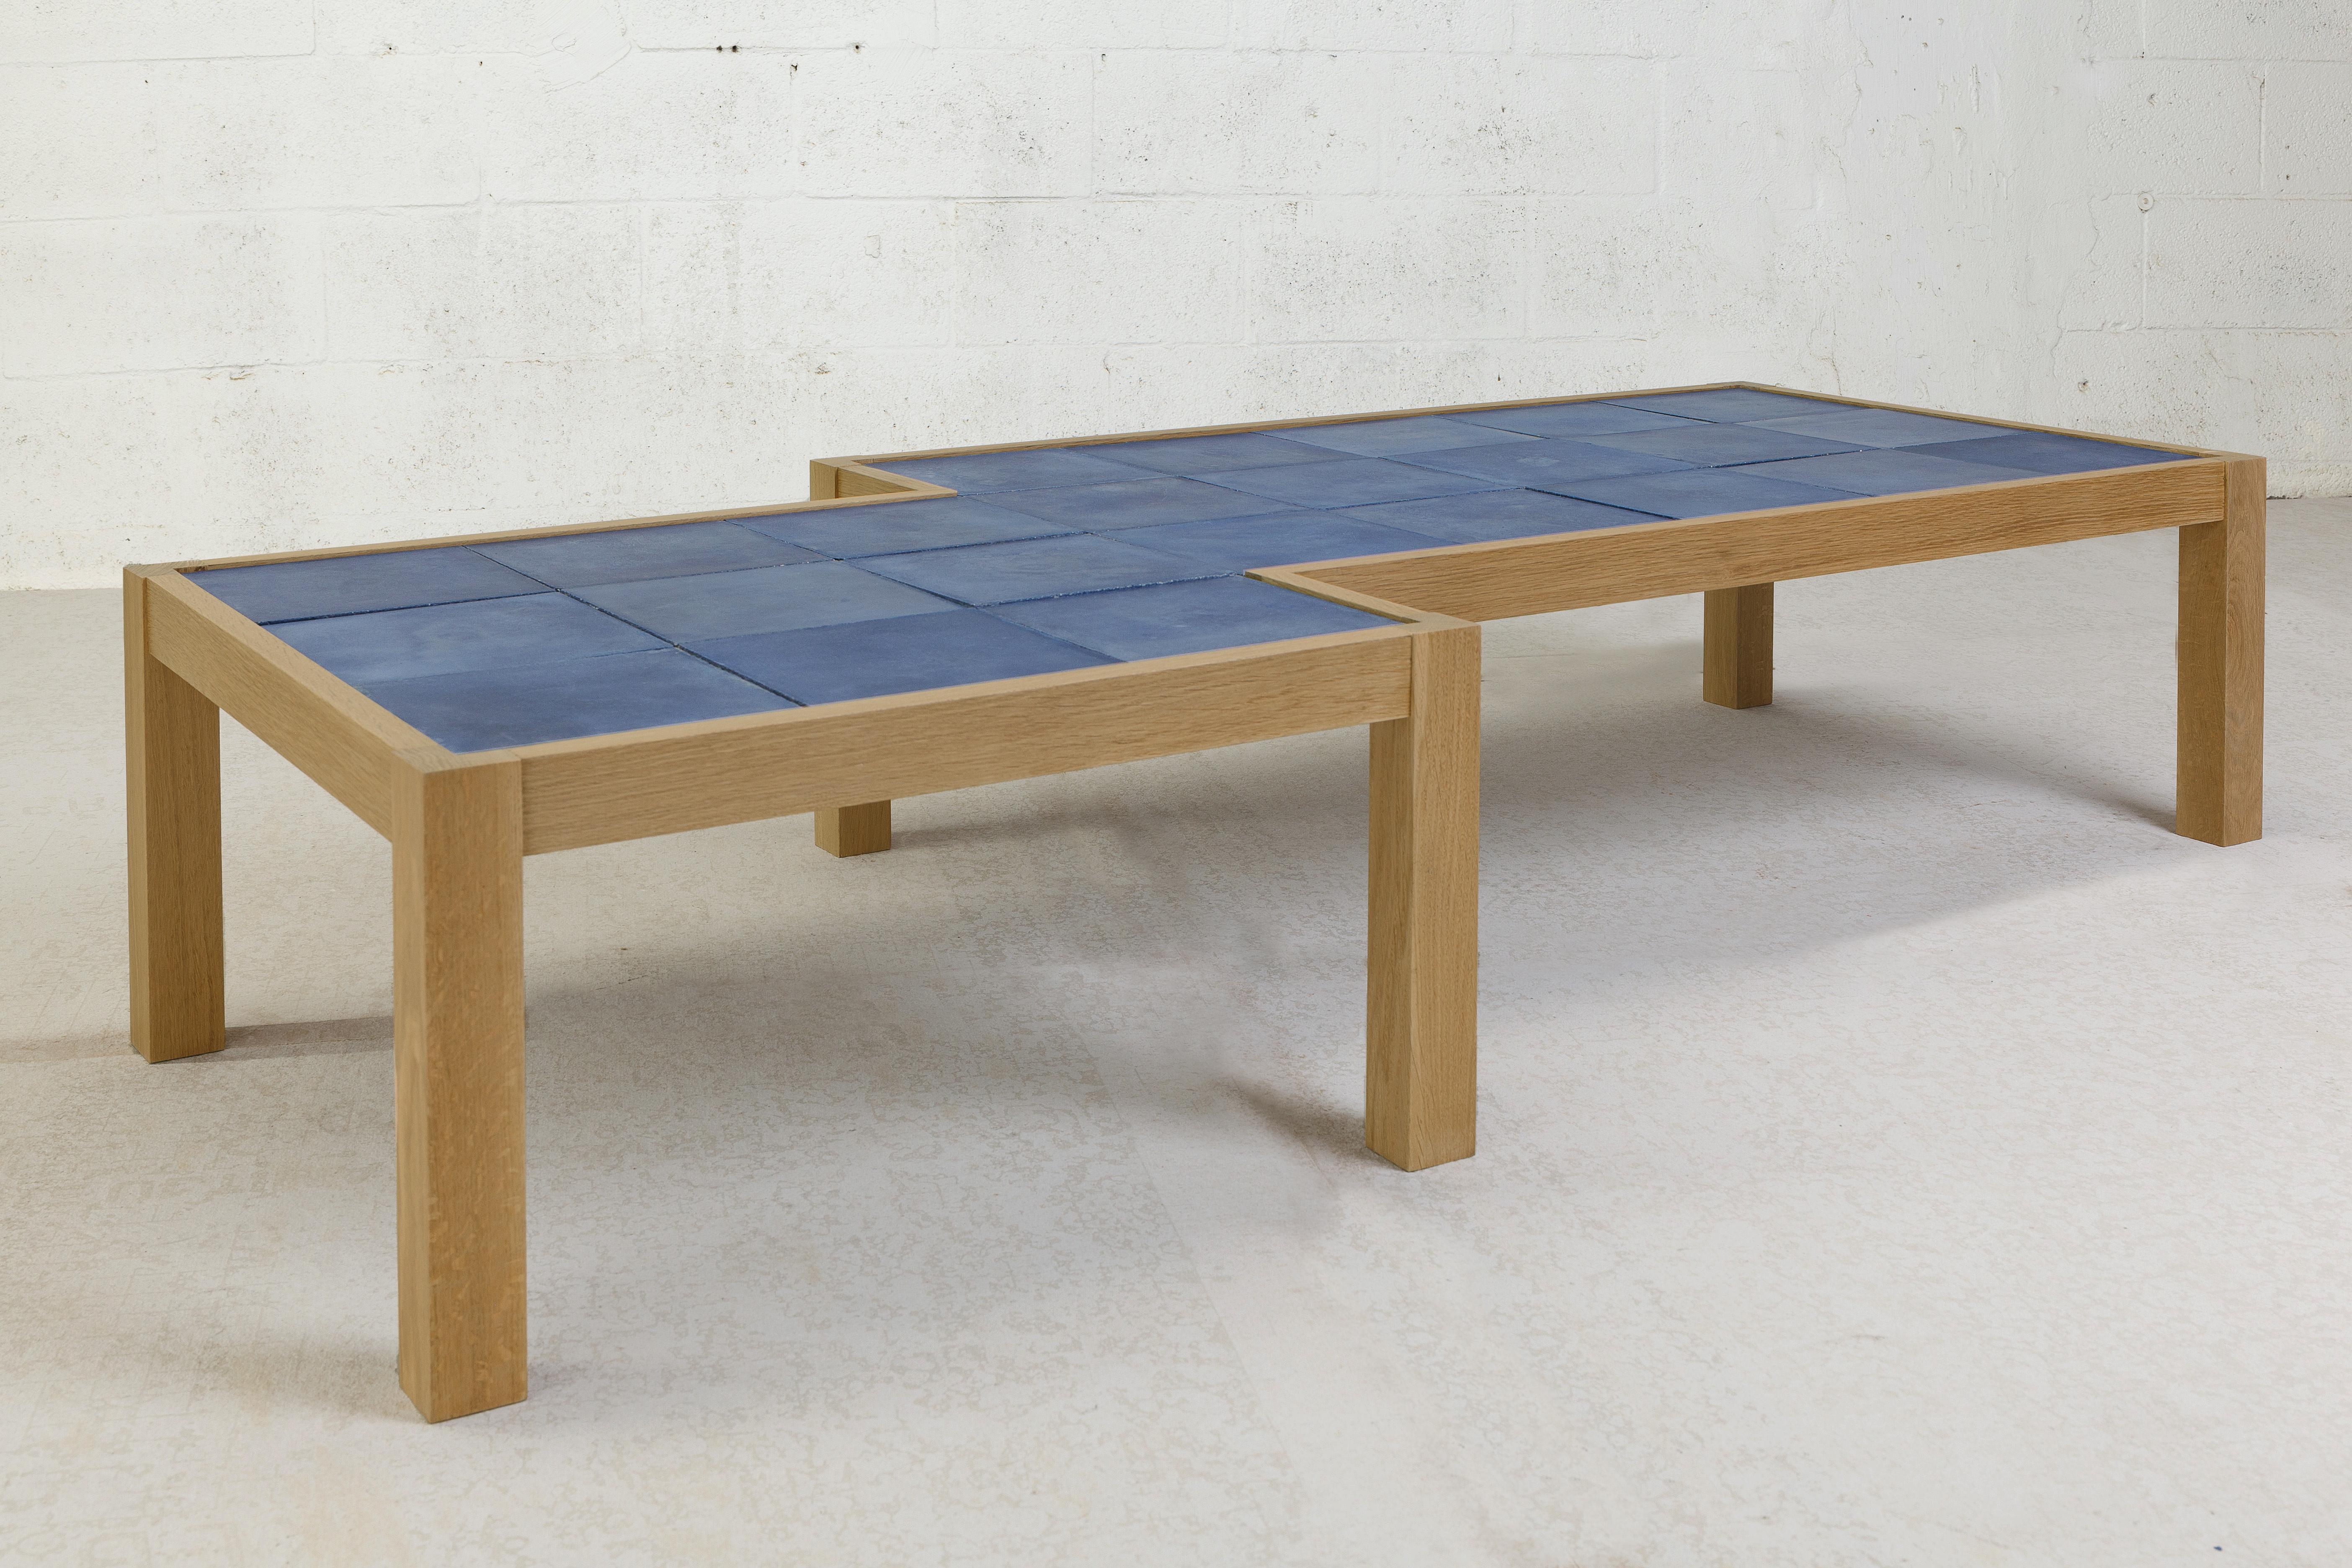 The new limited edition Blue Pixel Shift table is a warm contemporary design made of solid white oak and specialty blue hydraulic tiles. The frame and legs are made of solid white oak with a natural finish that adds warm tones and a sense of